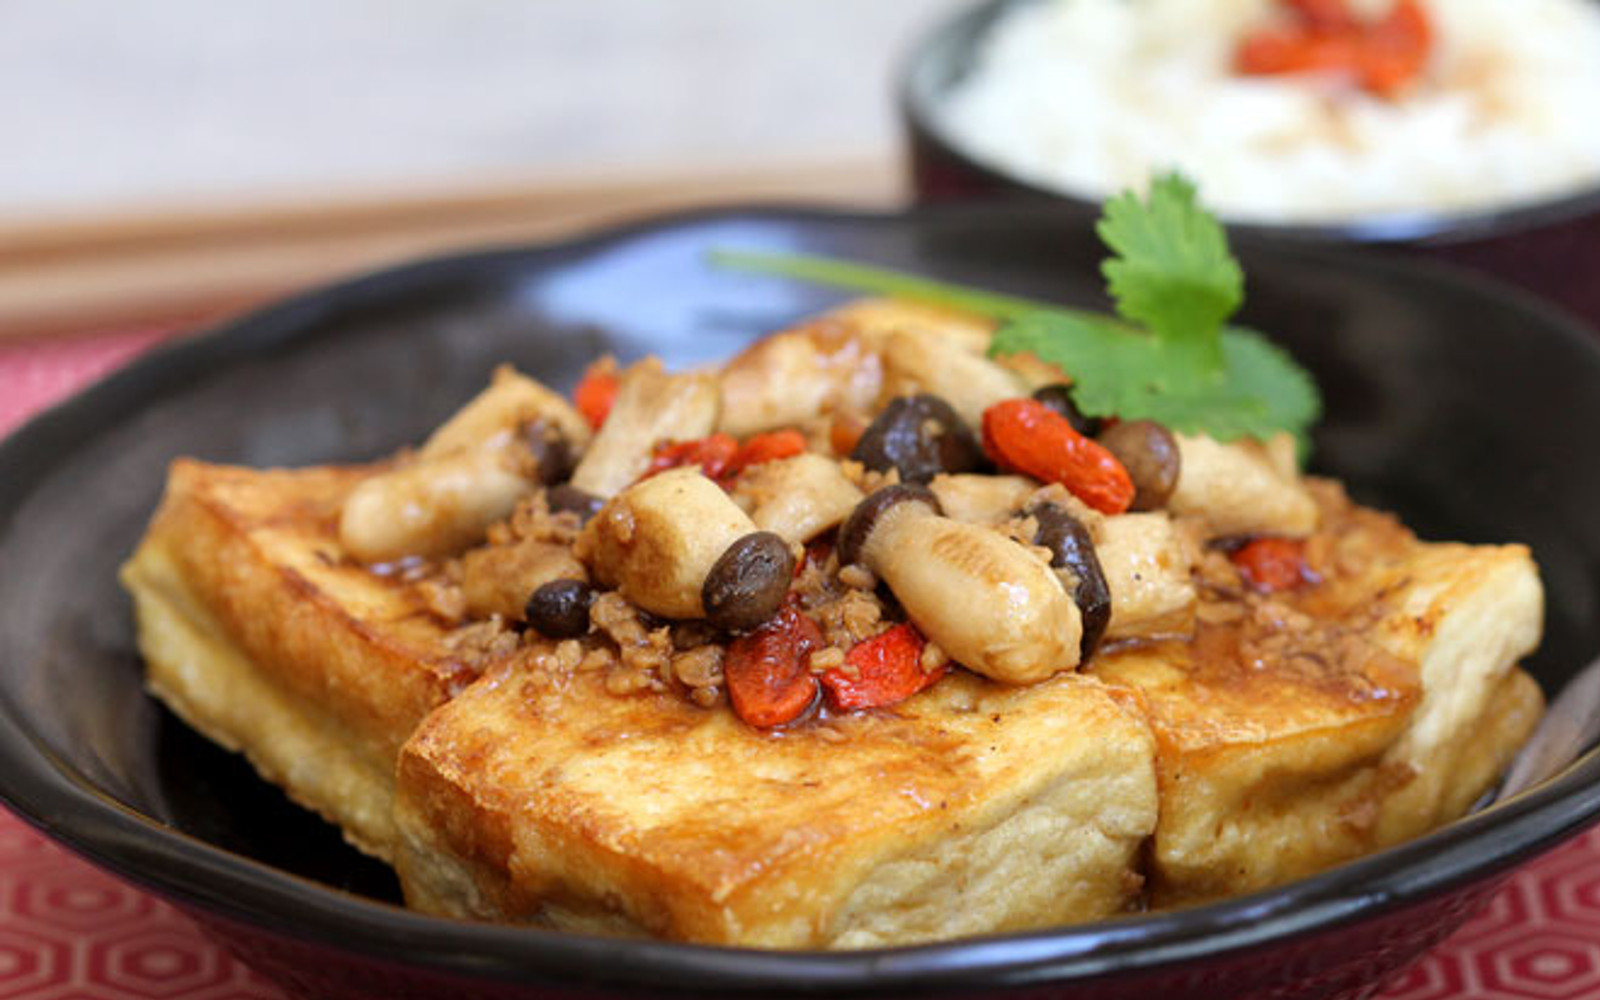 Braised Tofu With King Baby Oyster Mushrooms